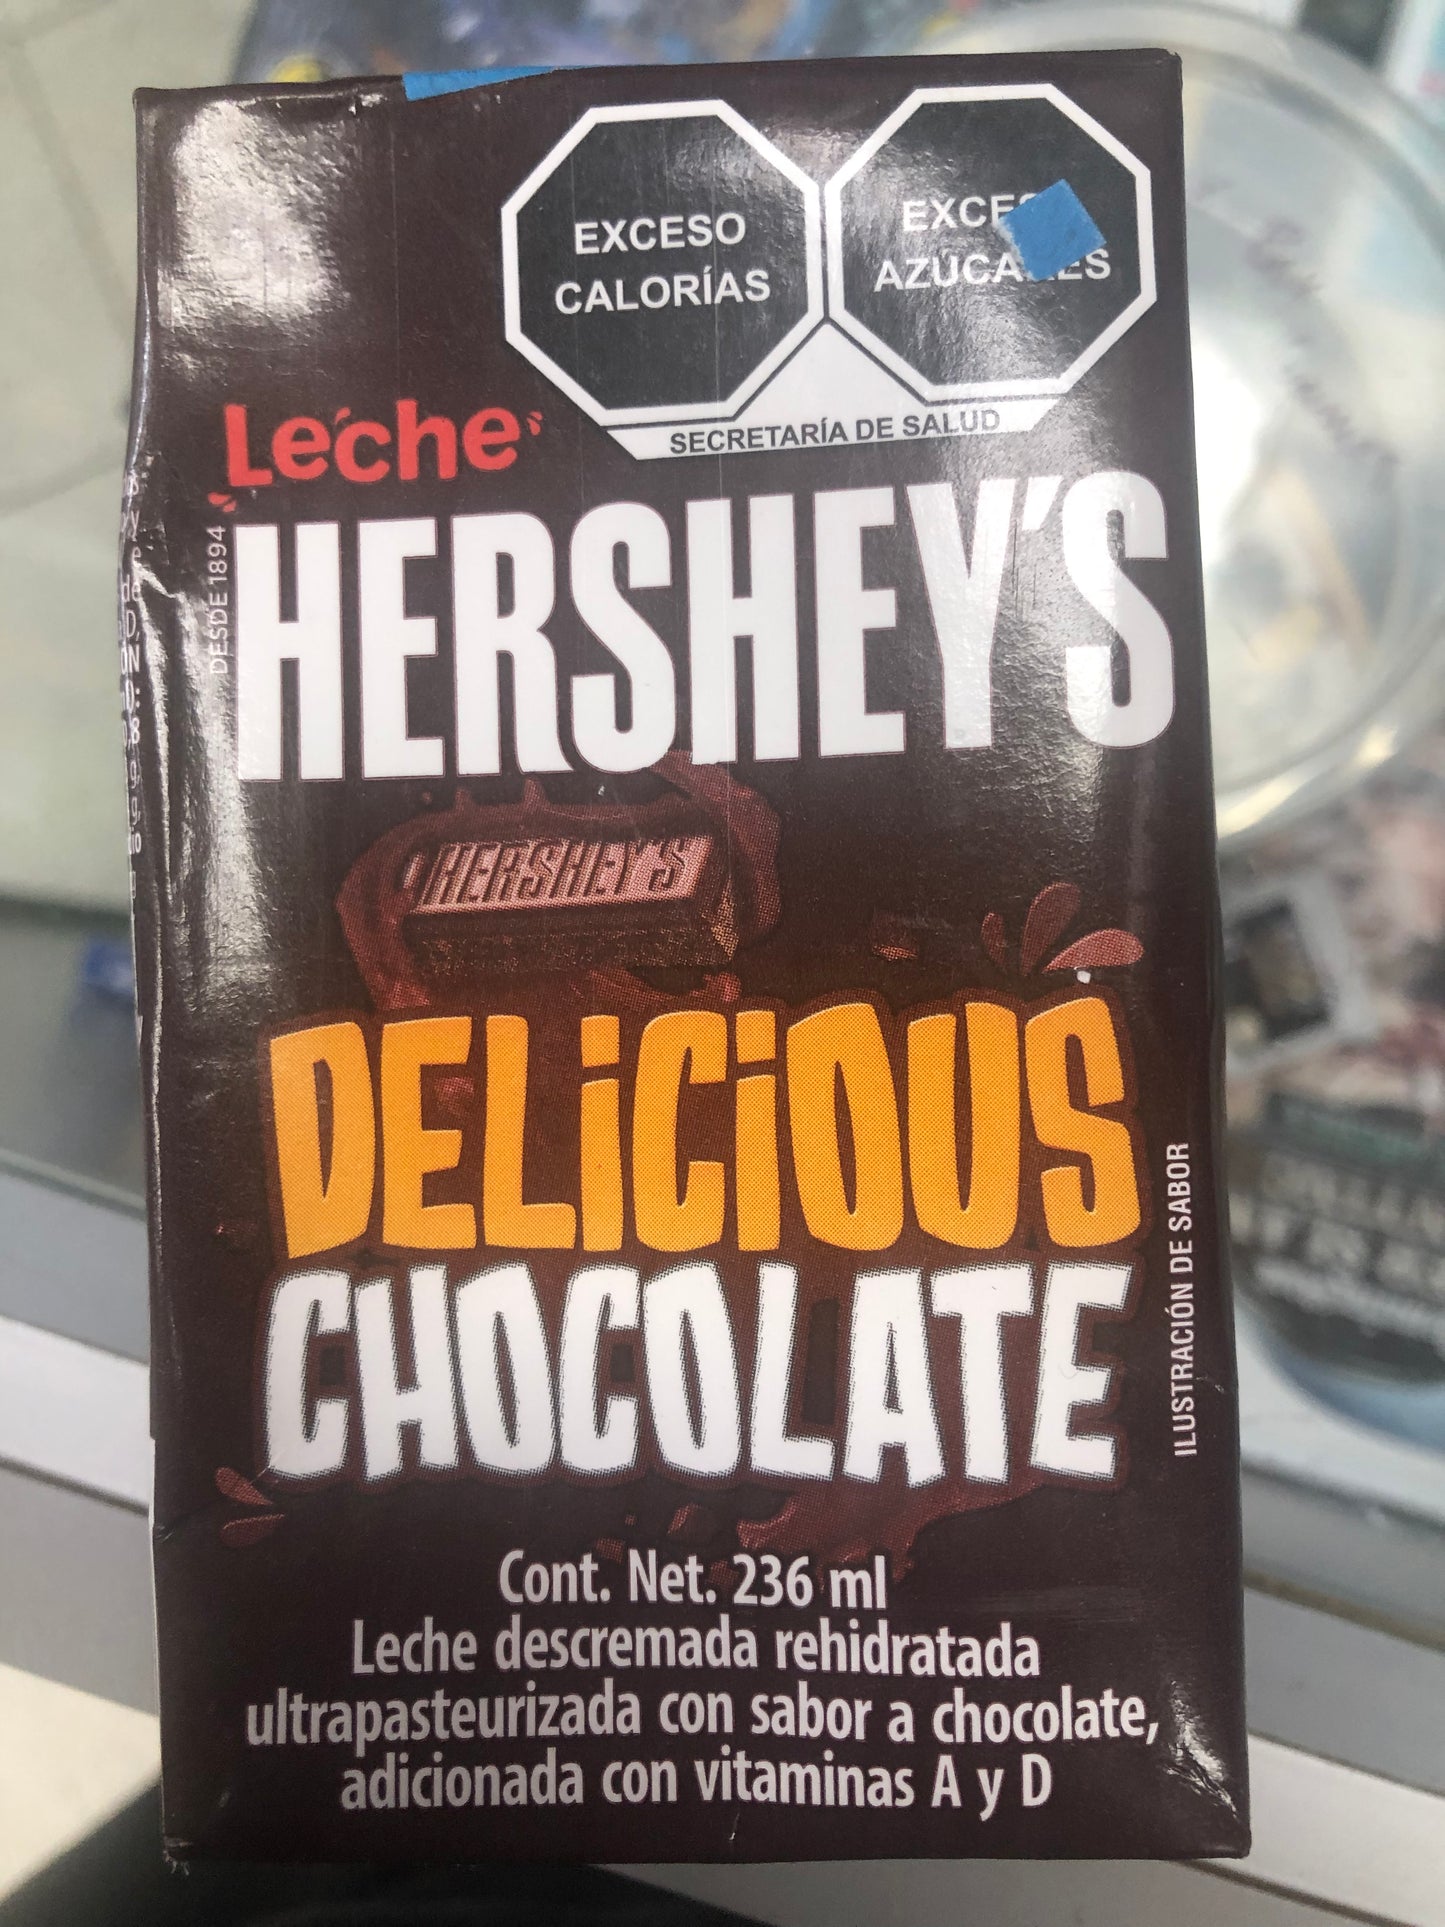 Mexican Leche Hershey's Chocolate Drink Box